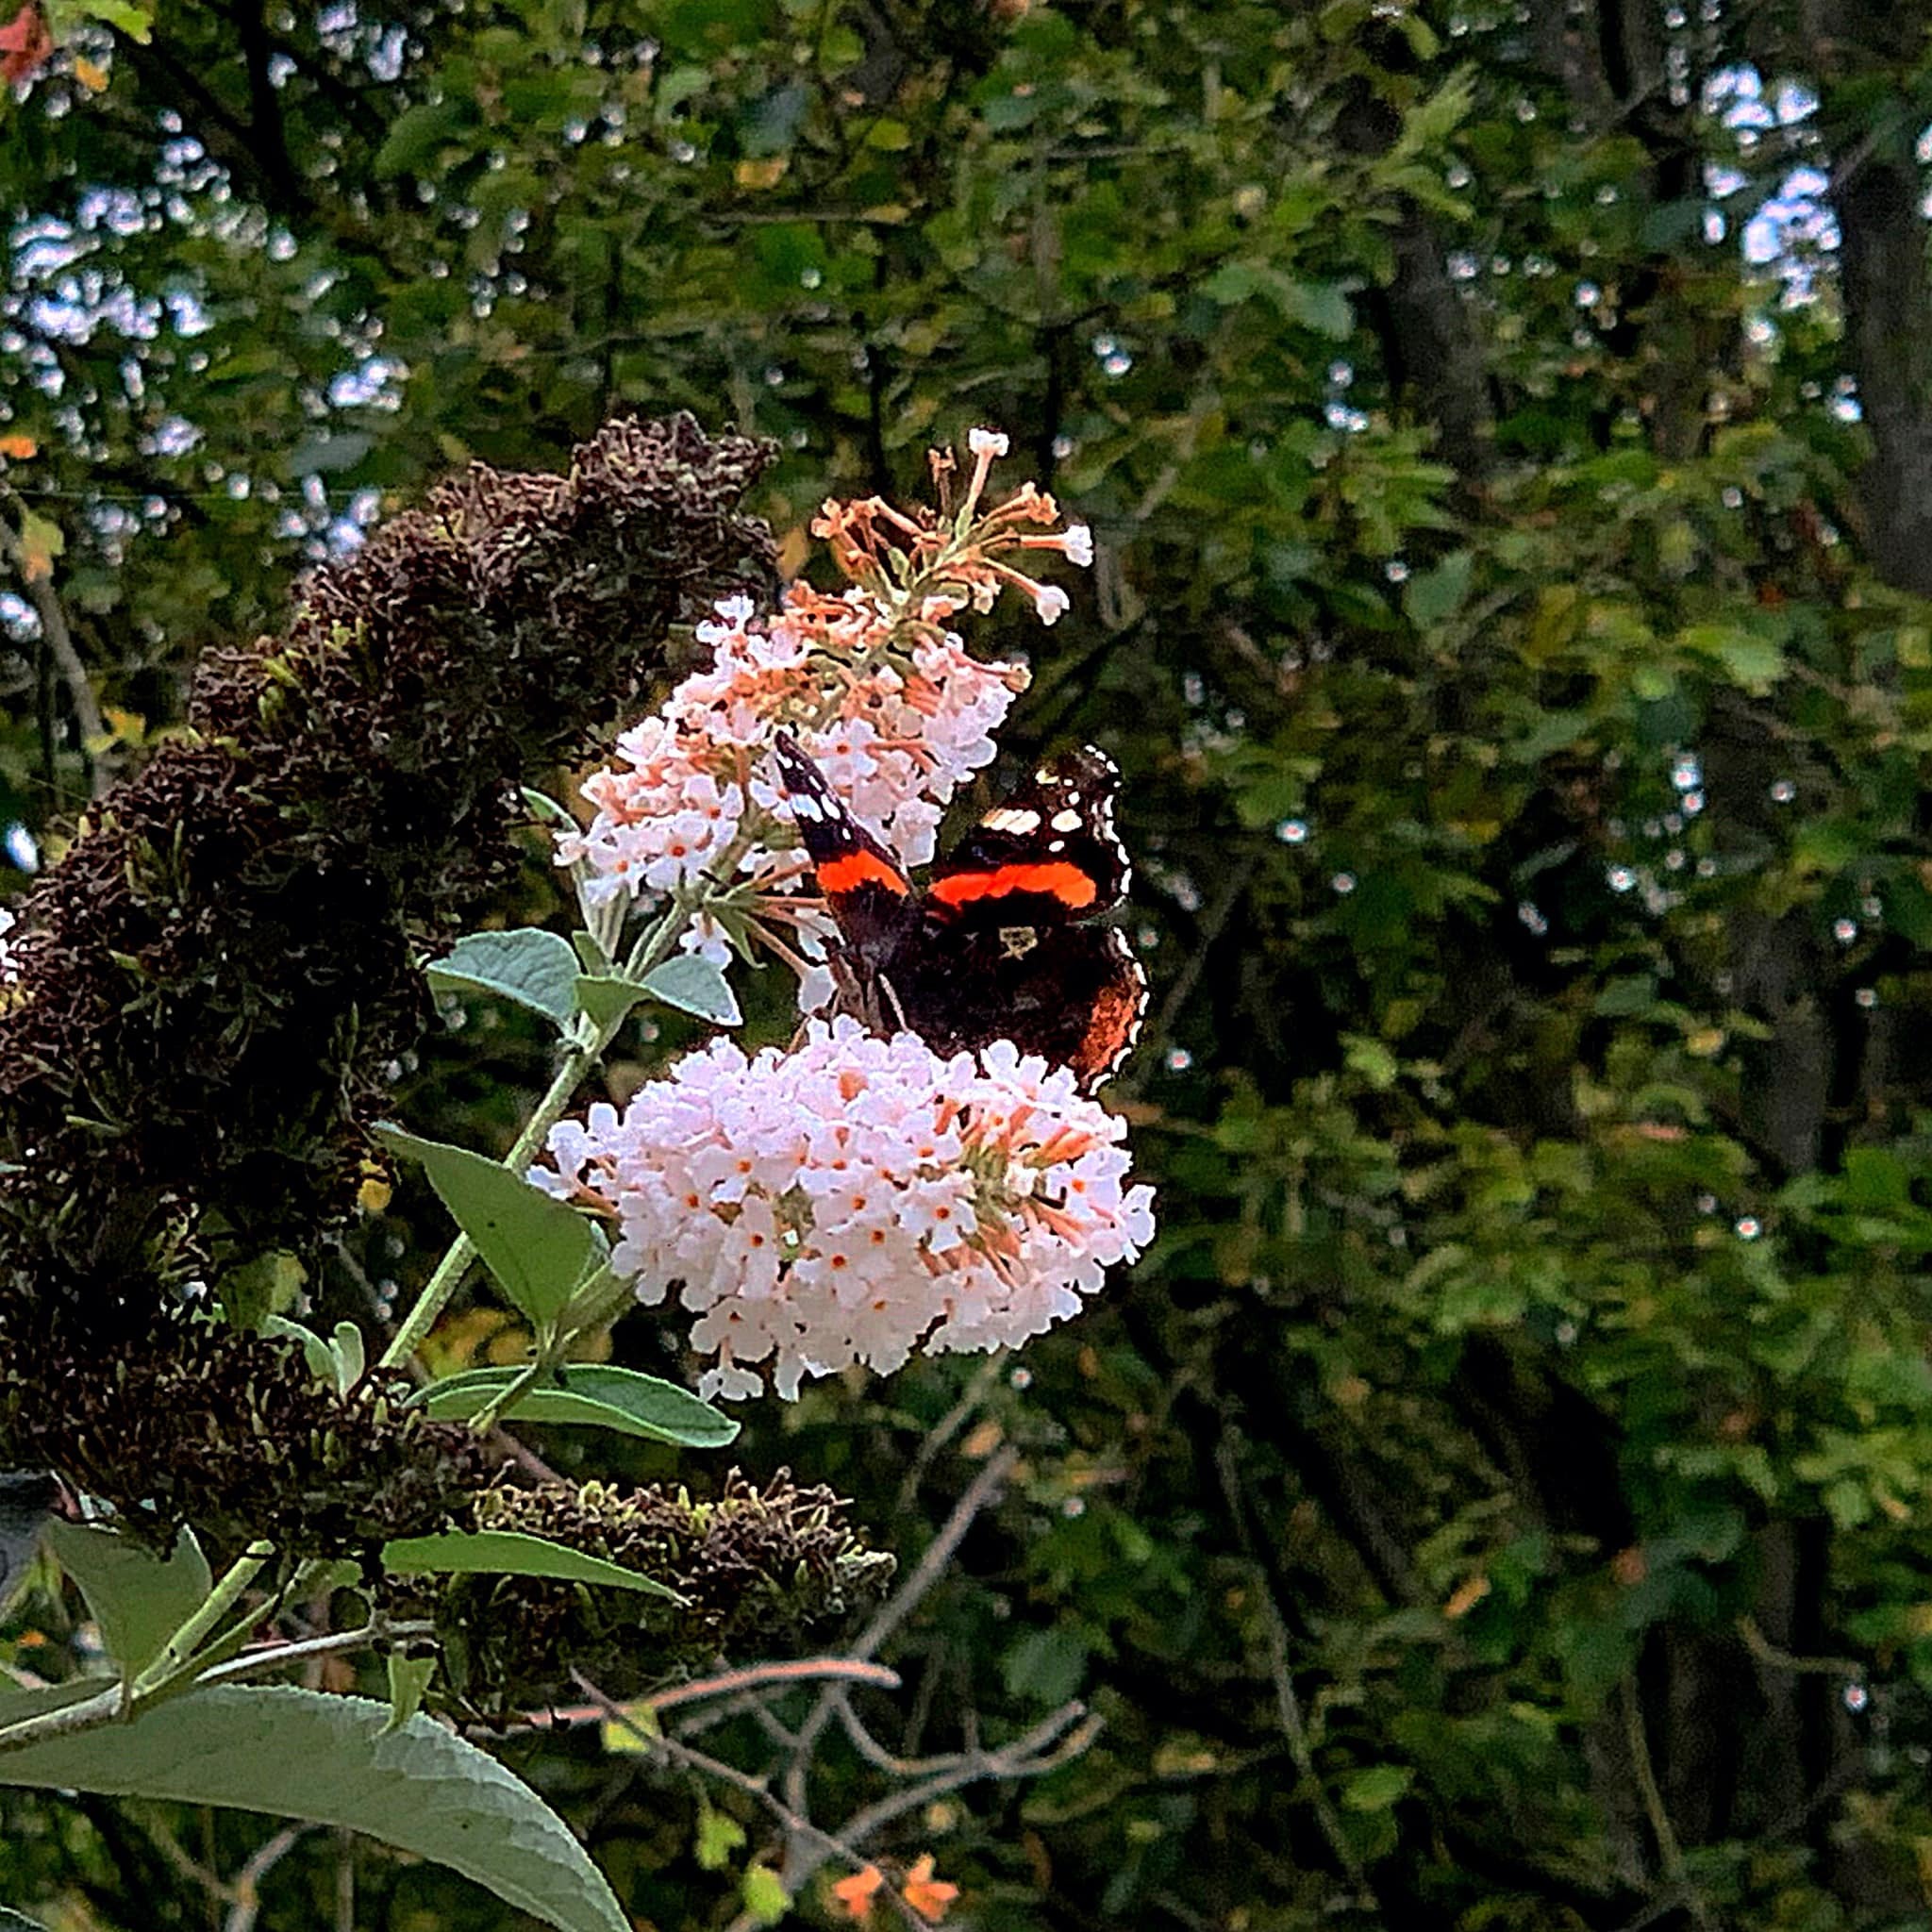 A red admiral by Carly Jo Curbishley